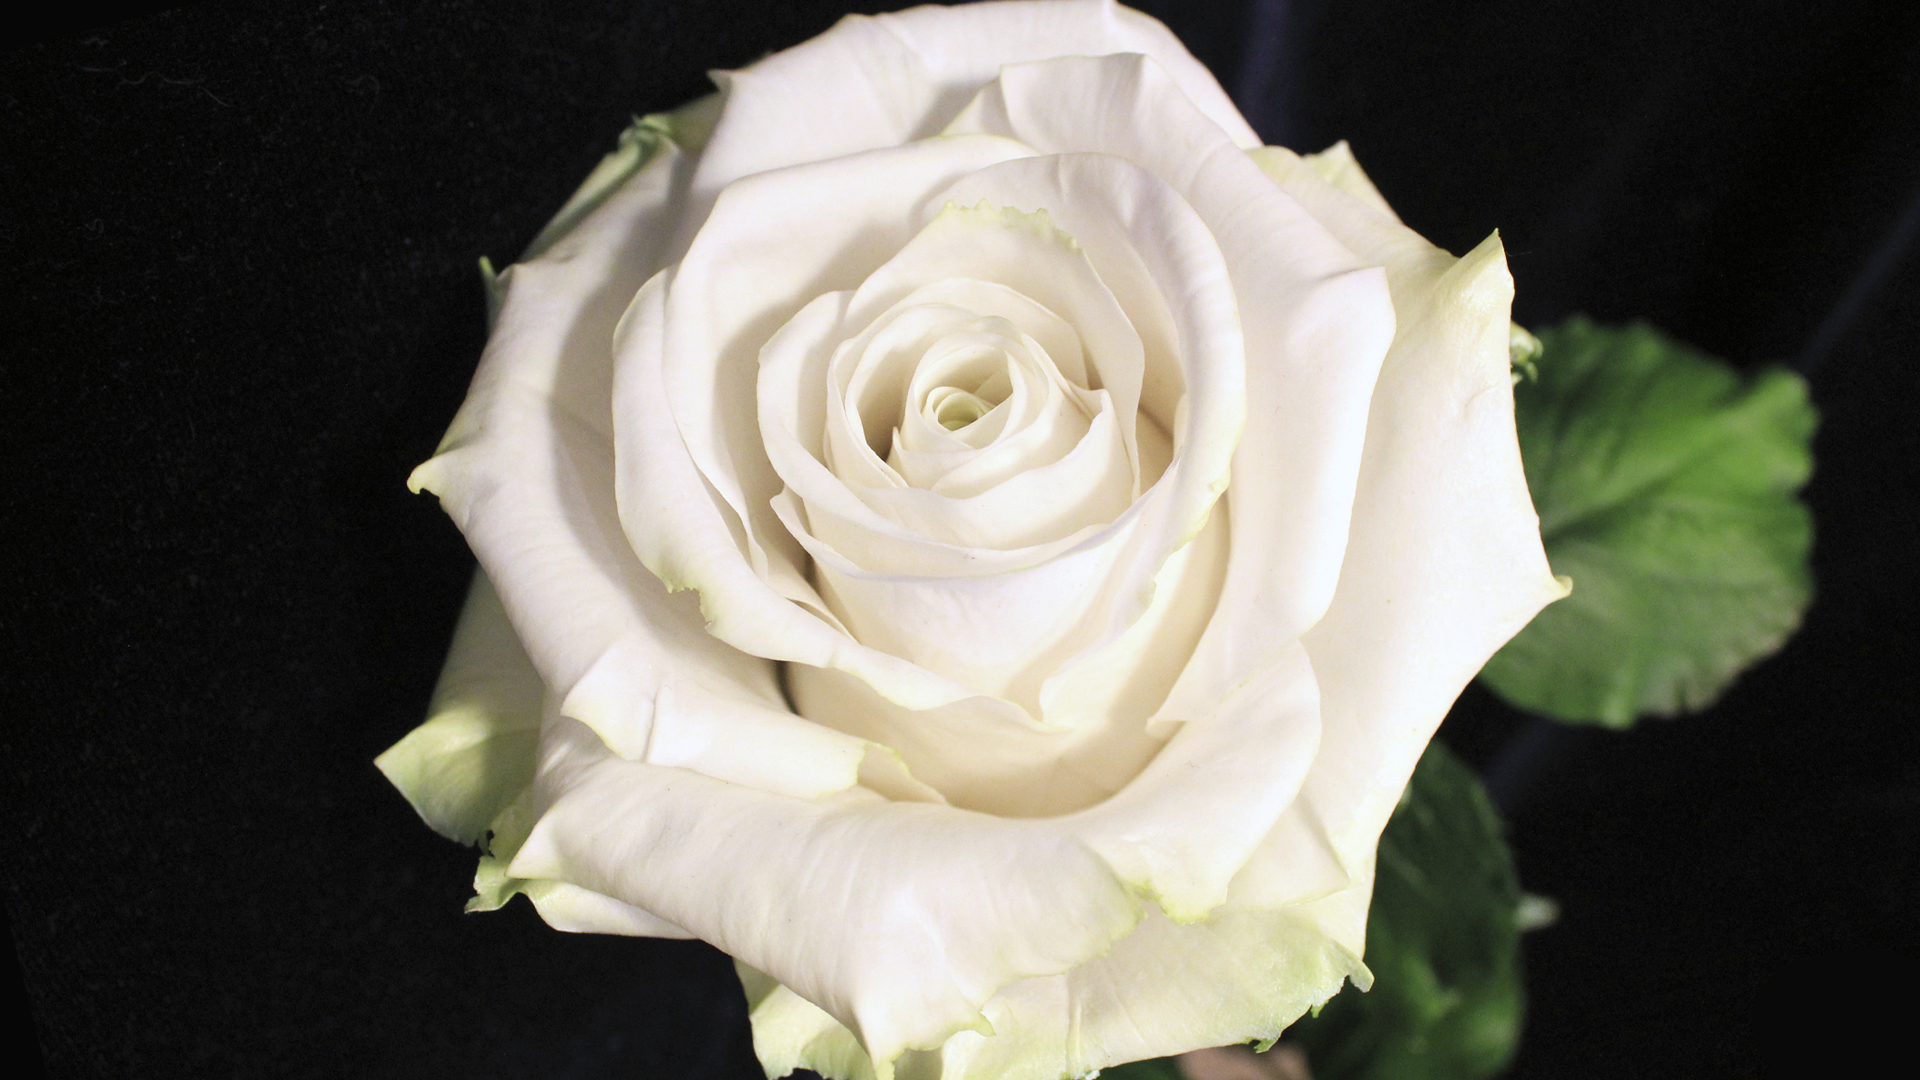 Beautiful white rose on a black background wallpapers and images